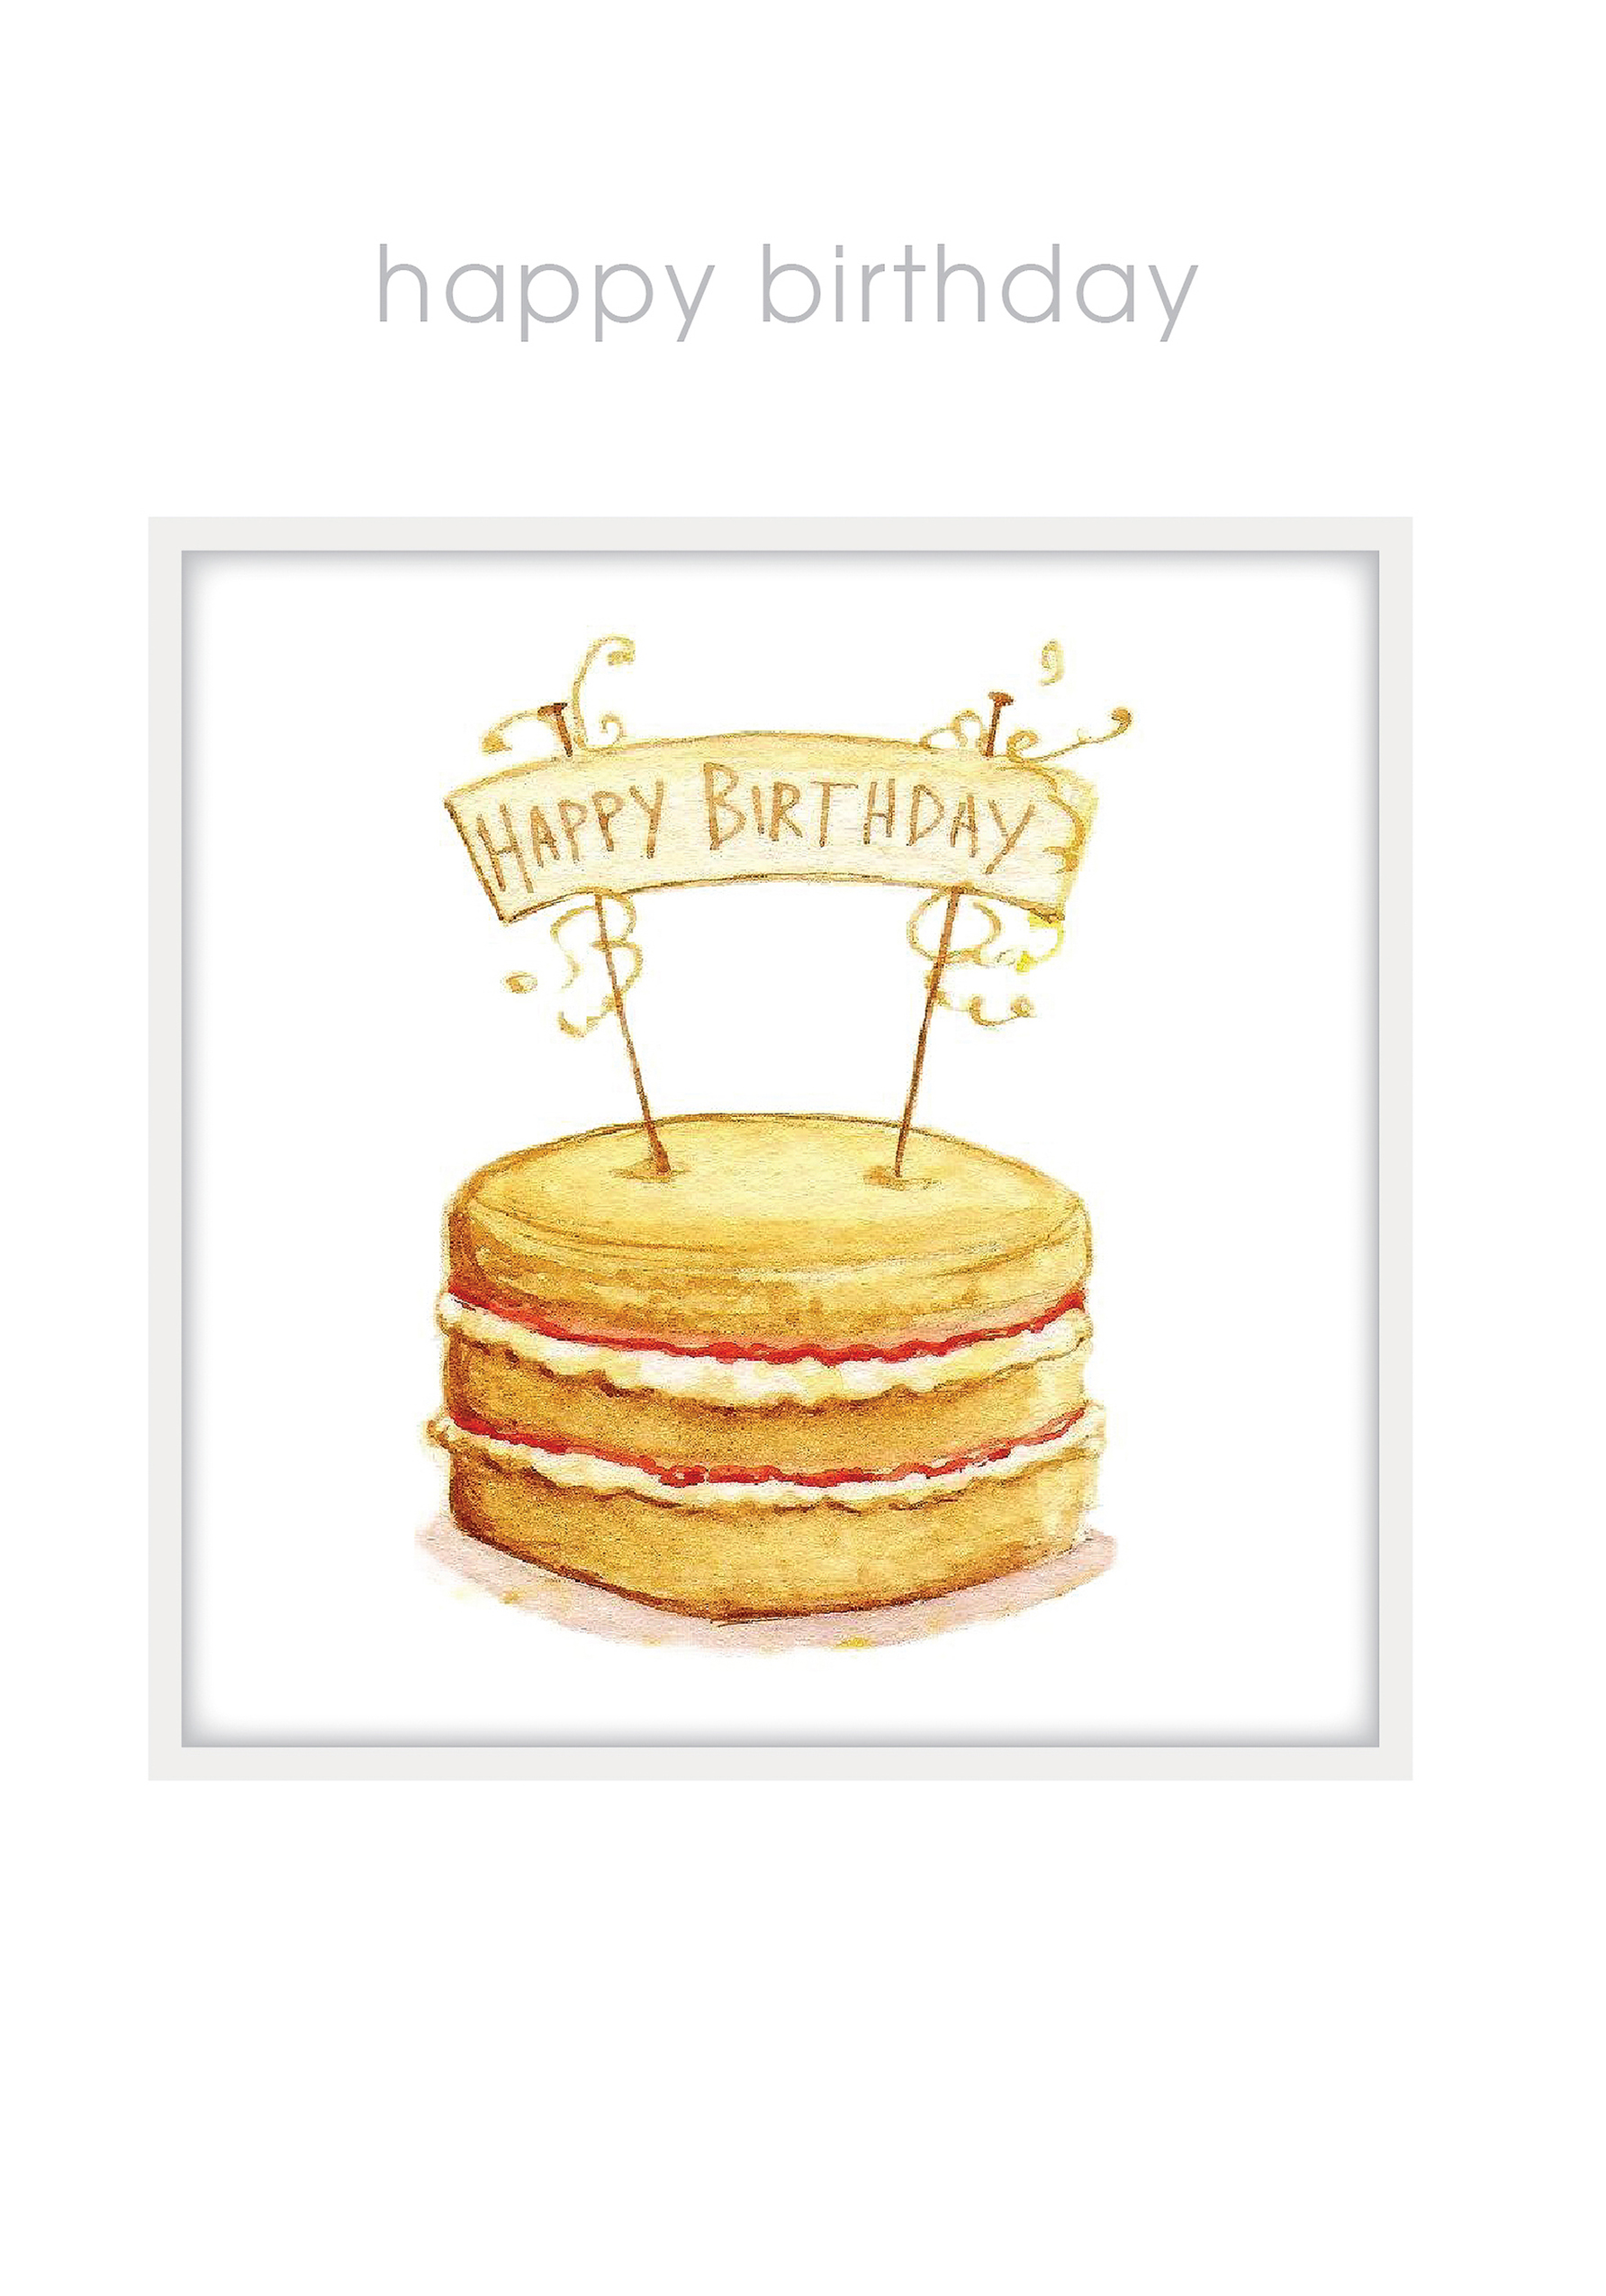 Buy Birthday Cake Card Watercolour Painting Elegant Celebration Happy  Wishes Slice of Layered Iced Sponge Candle Greeting Card for Friends BFF  Online in India - Etsy